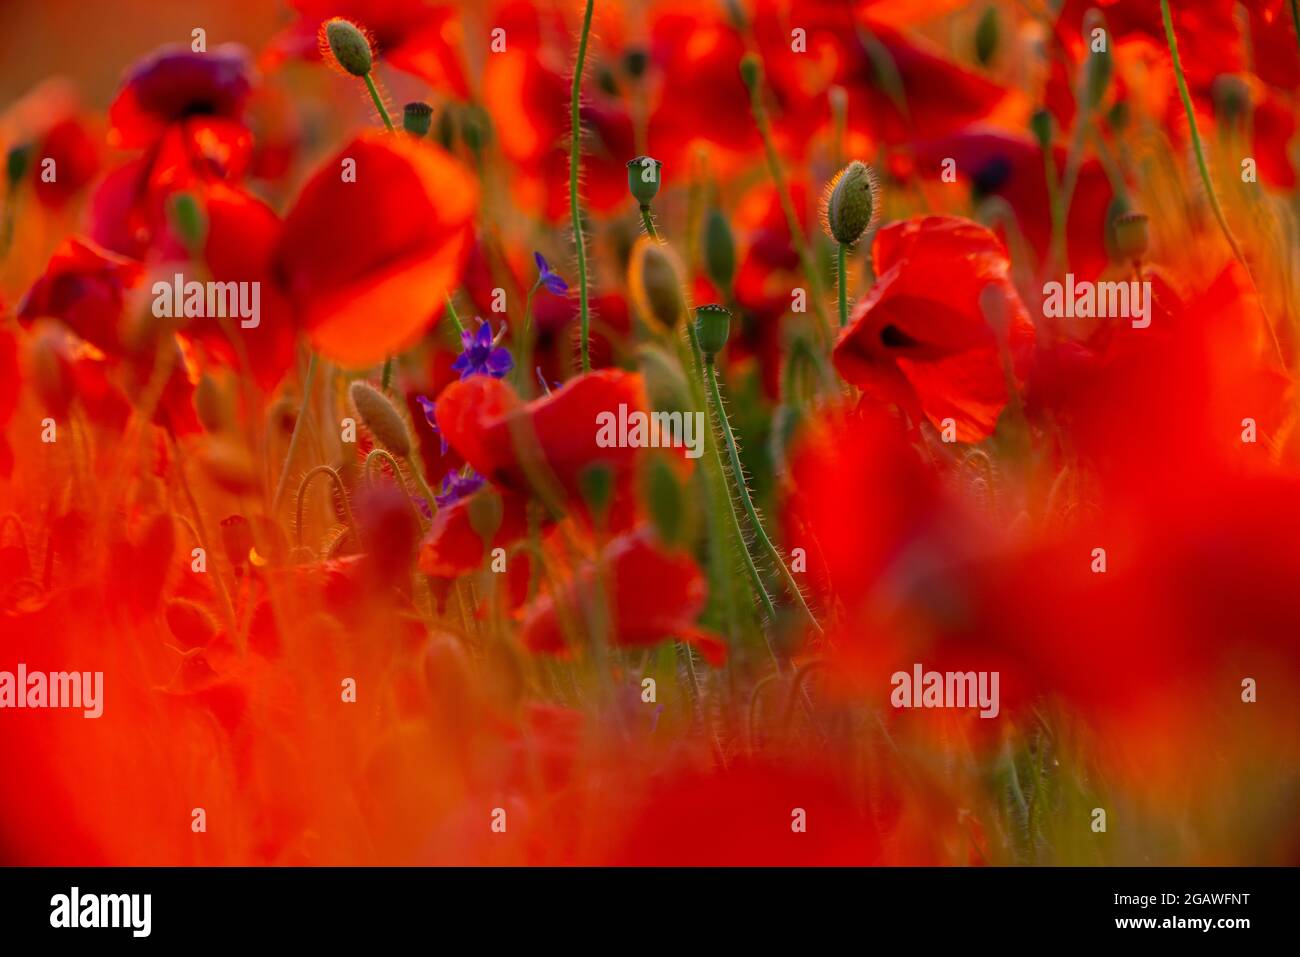 Poppy flowers field close-up and macro. Agriculture and natural background Stock Photo